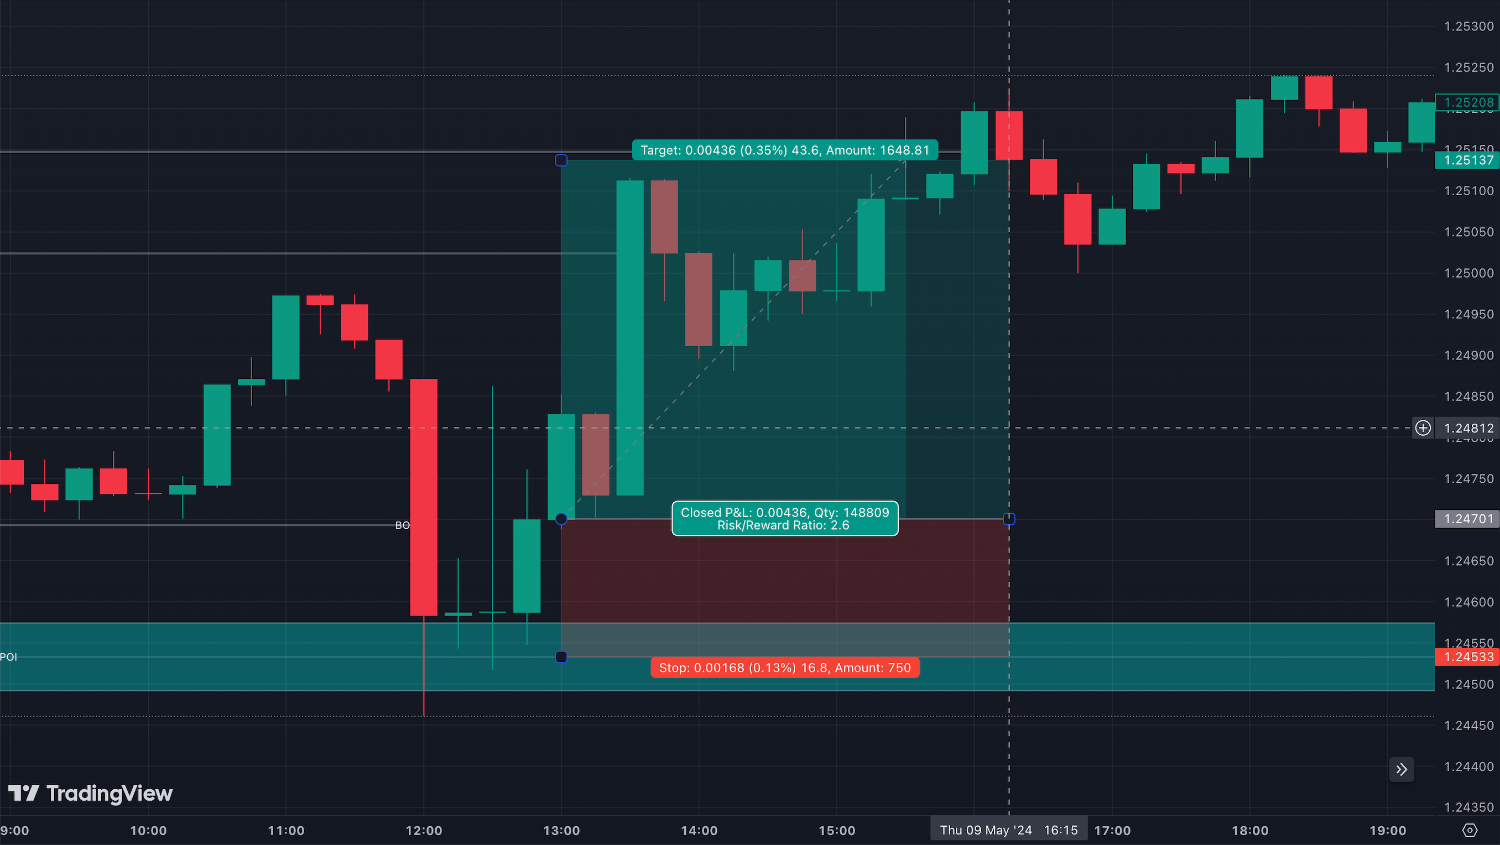 Forex day trading analysis on GBP/USD